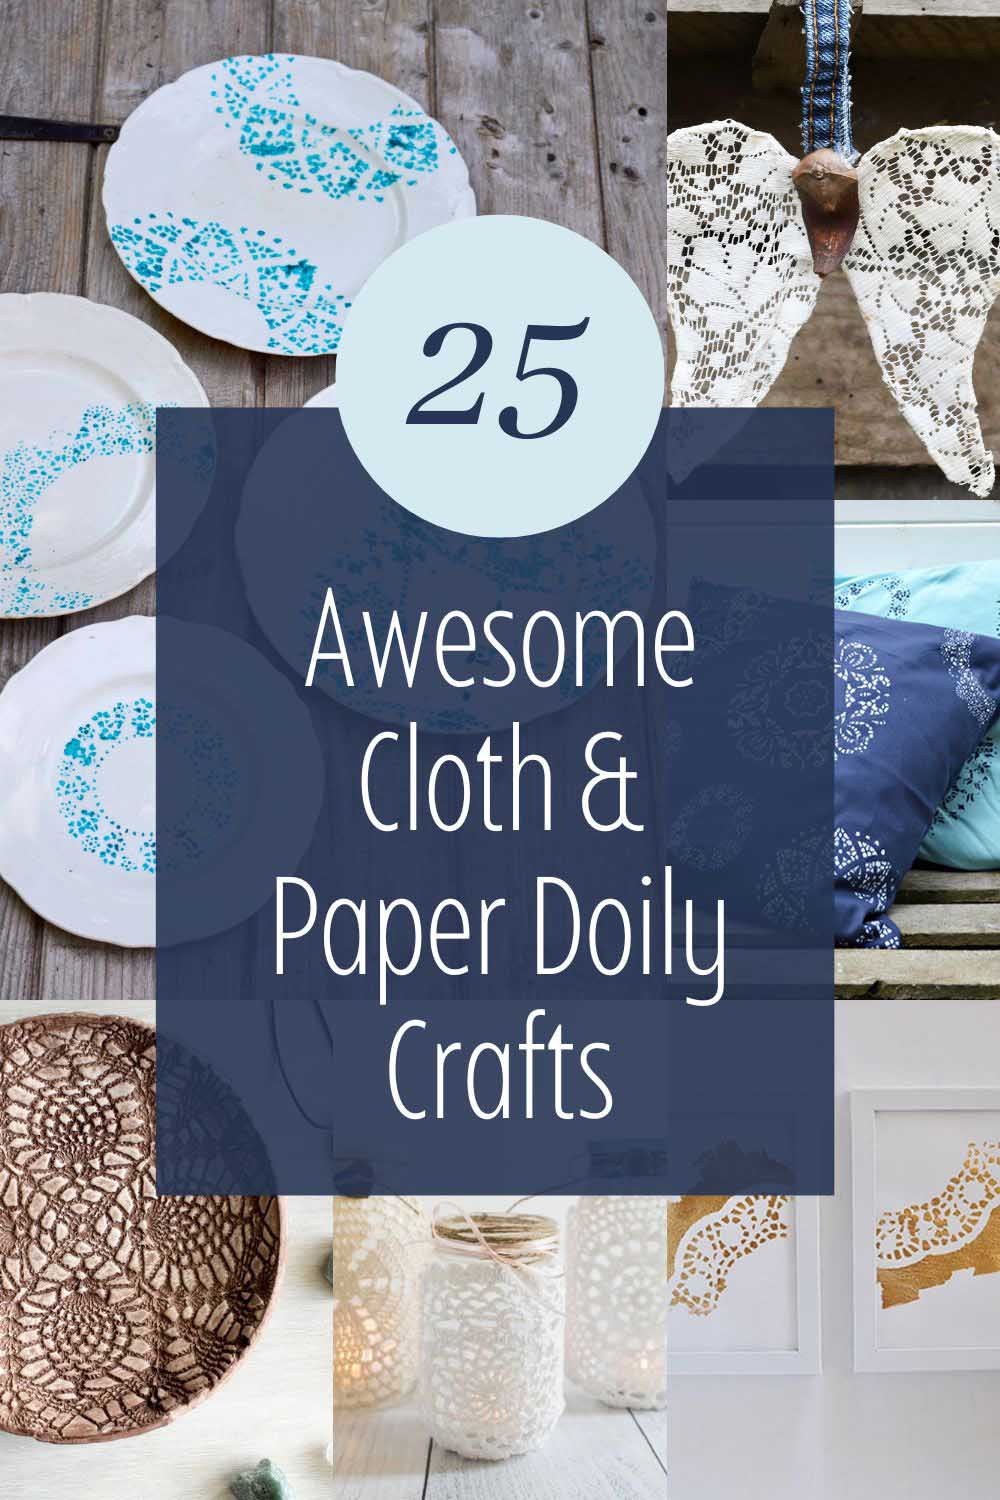 Collection of cloth and paper doily crafts